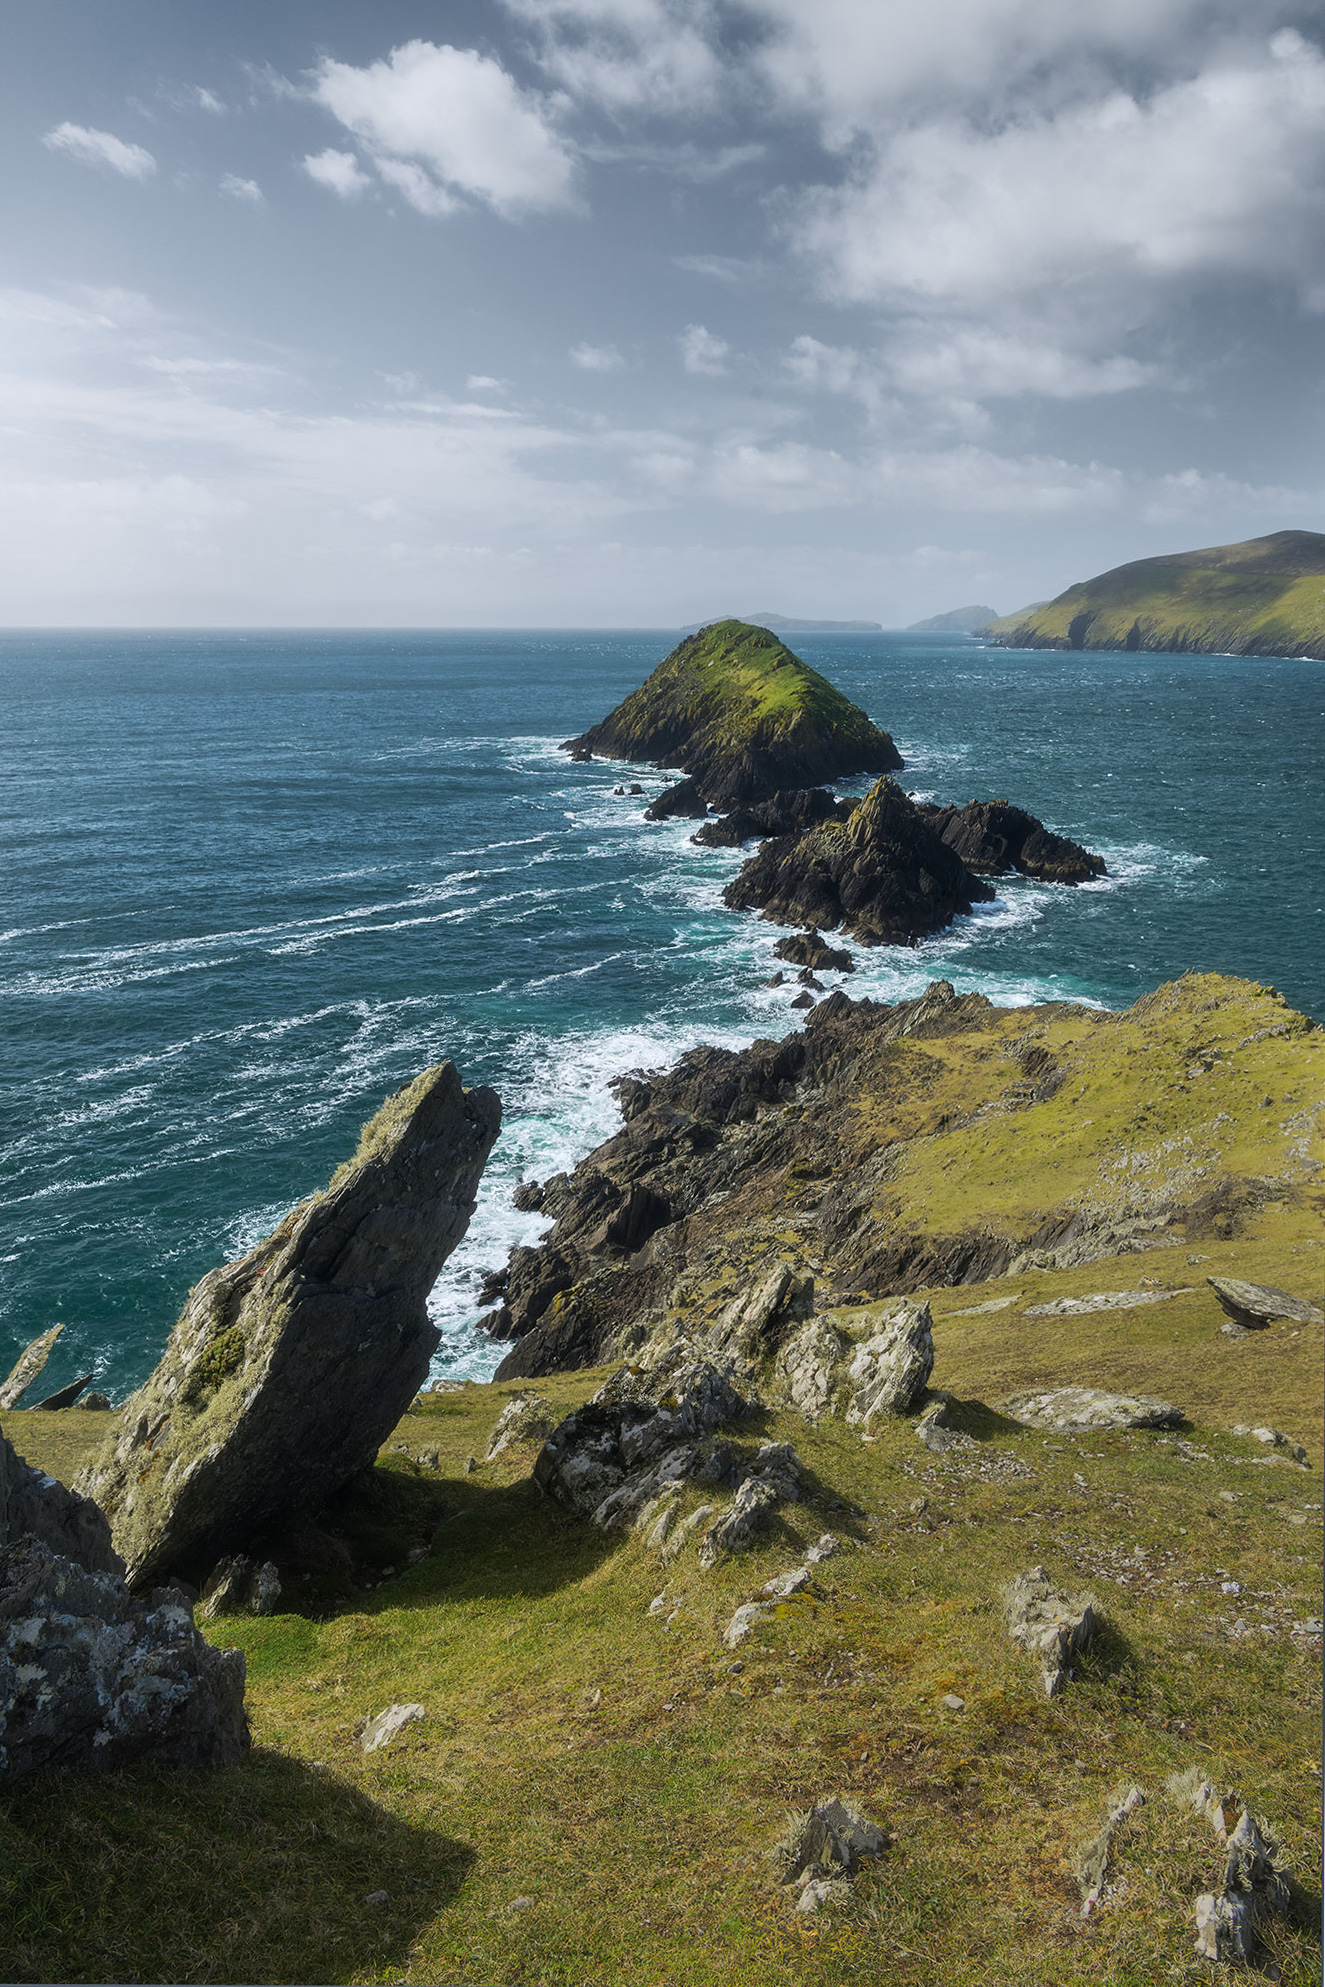 A captivating landscape photograph of Dunmore Head, situated along the Wild Atlantic Way on the Dingle Peninsula in Ireland. Taken with a Nikon Z8, this seascape captures the rugged beauty of the Irish coastline.